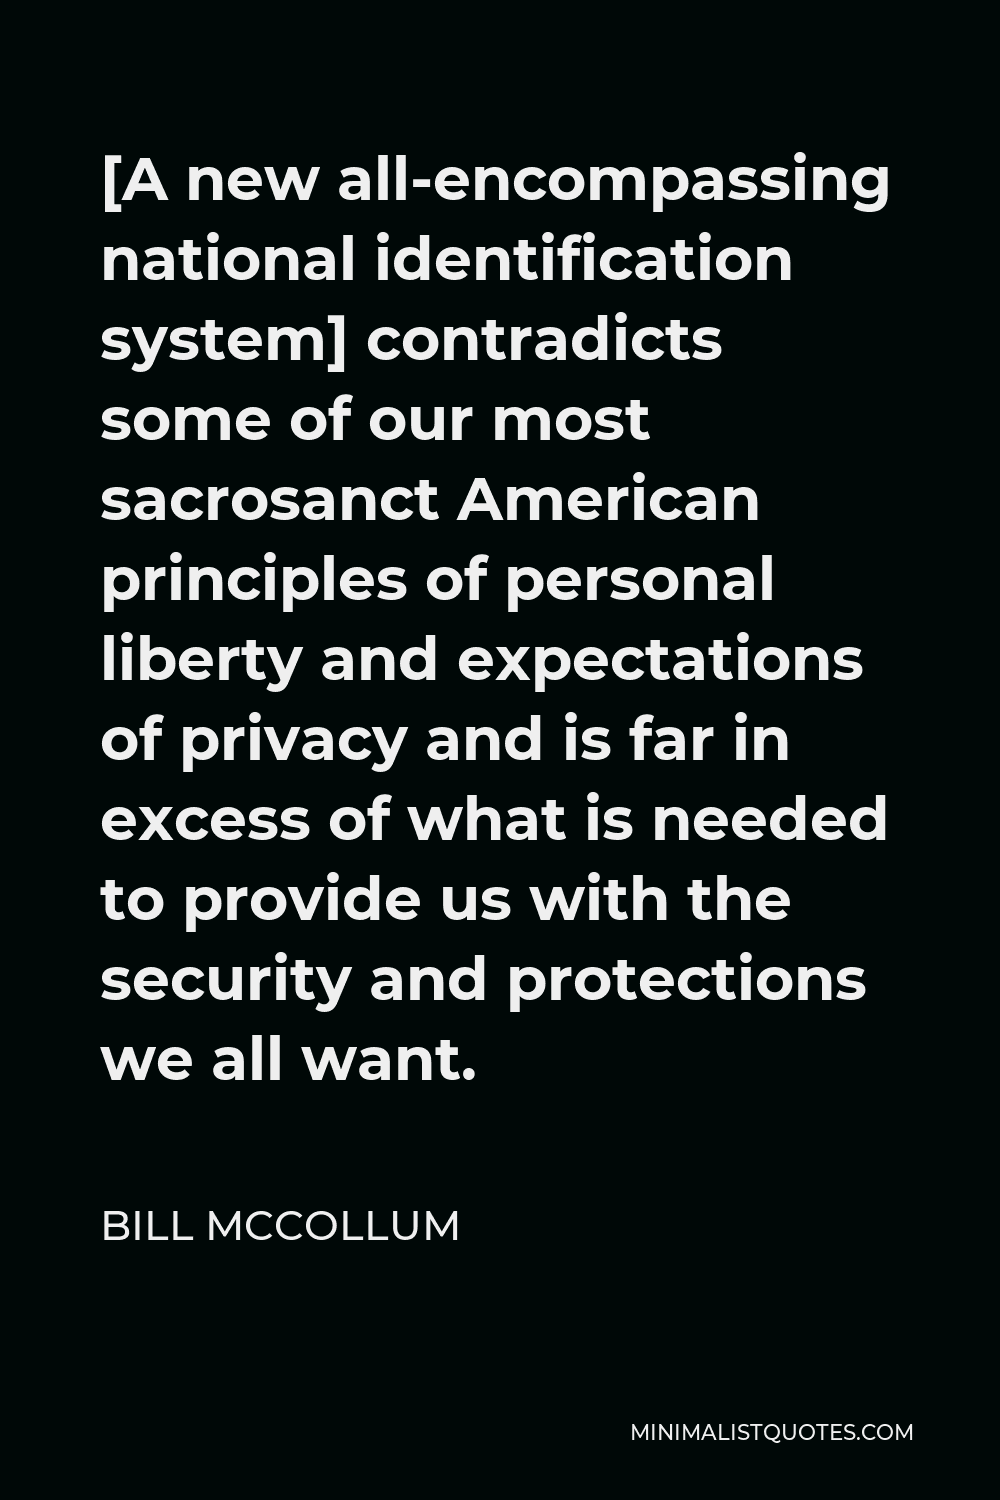 Bill McCollum Quote - [A new all-encompassing national identification system] contradicts some of our most sacrosanct American principles of personal liberty and expectations of privacy and is far in excess of what is needed to provide us with the security and protections we all want.